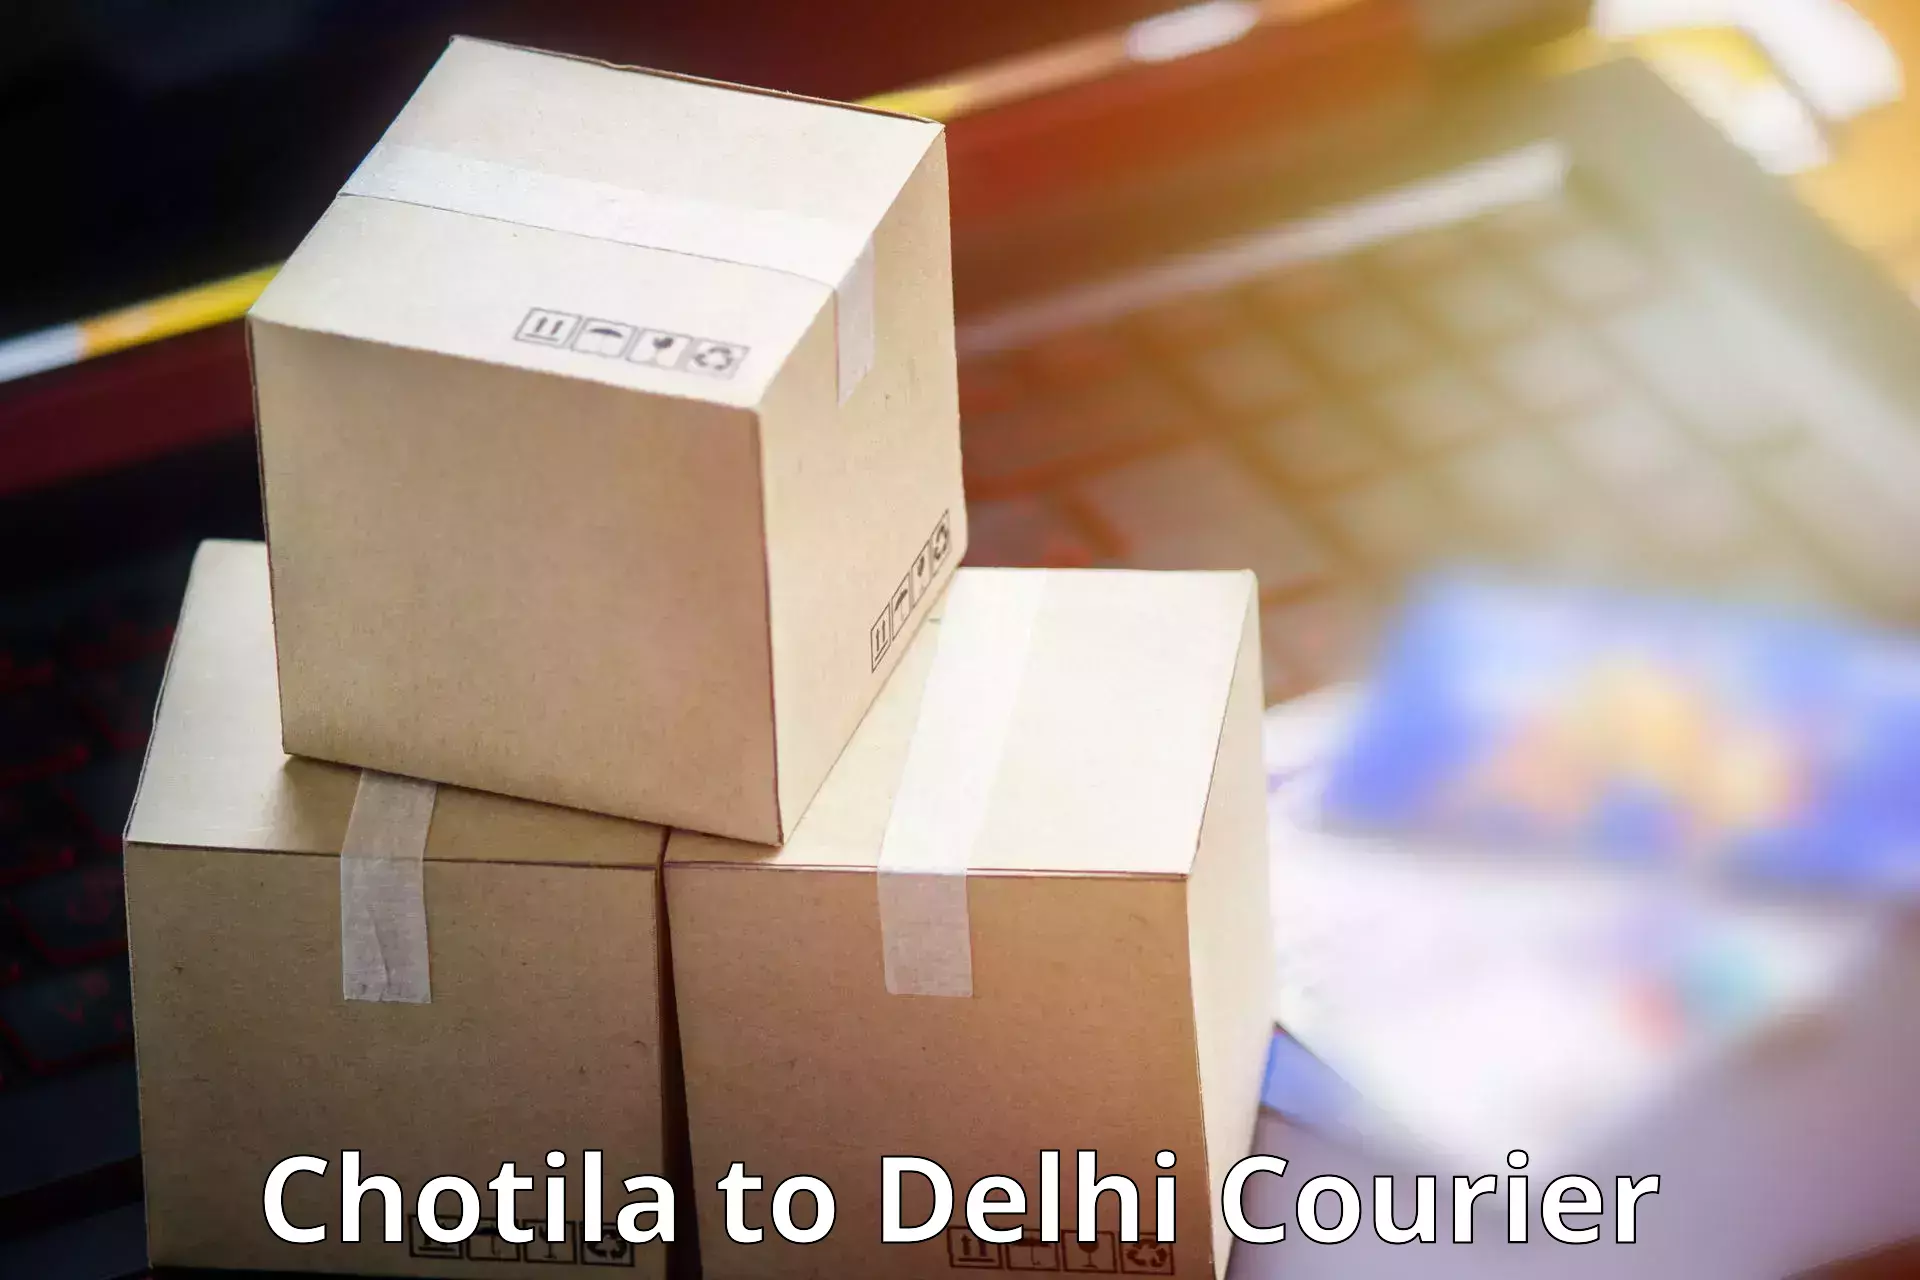 24/7 courier service Chotila to Lodhi Road